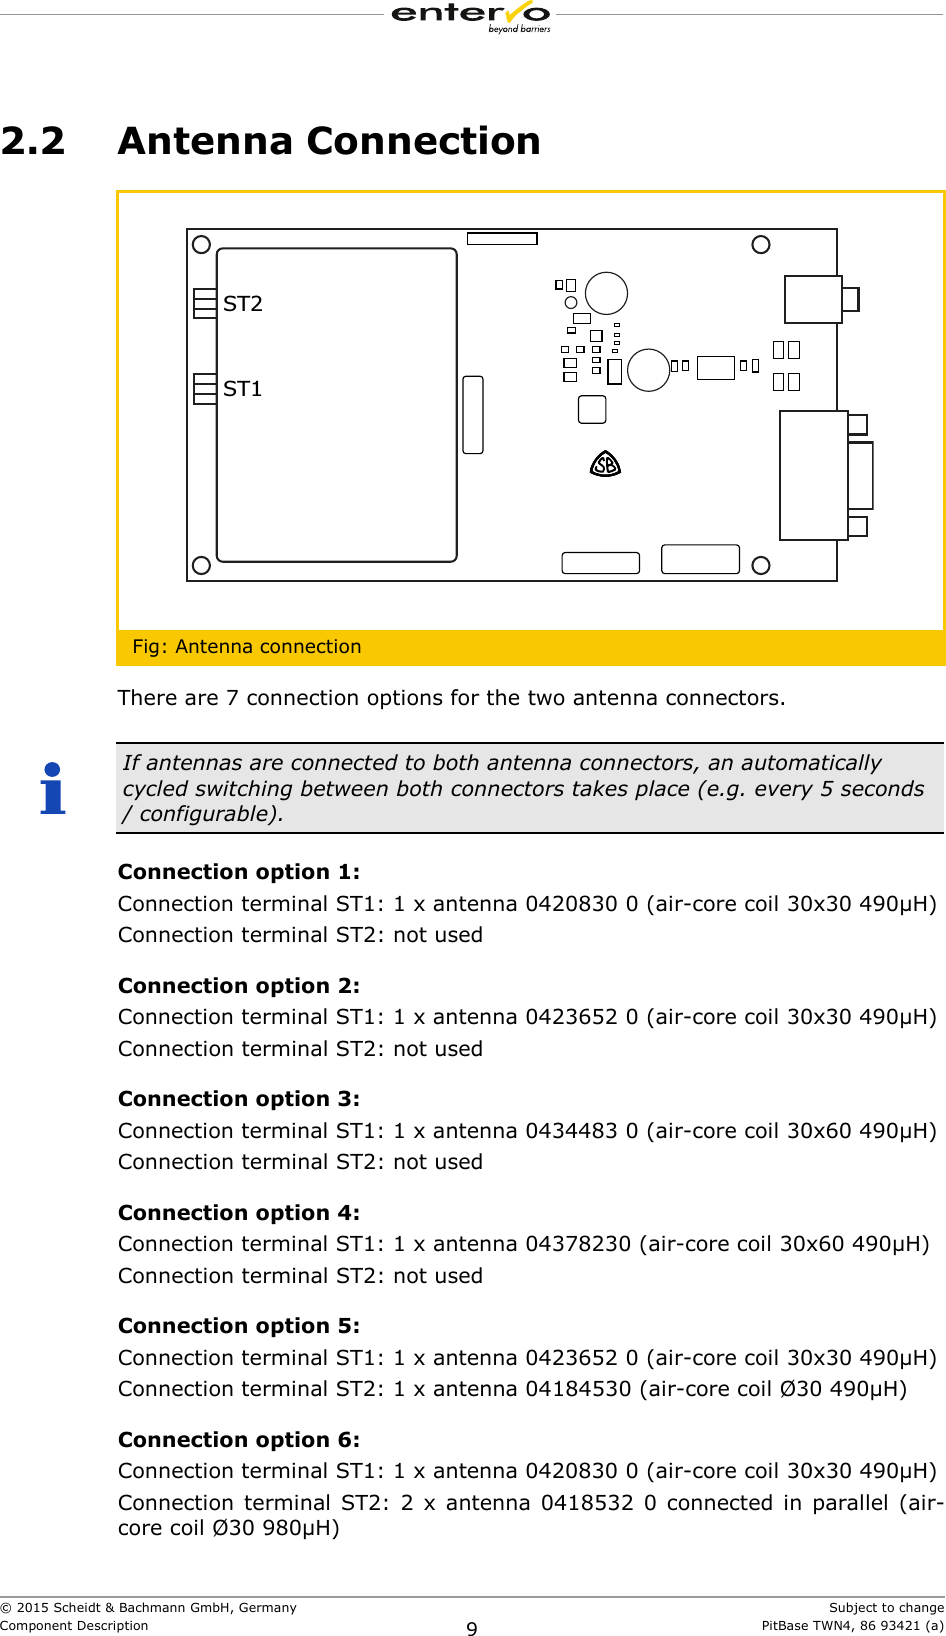  © 2015 Scheidt &amp; Bachmann GmbH, Germany    Subject to changeComponent Description 9 PitBase TWN4, 86 93421 (a) 2.2 Antenna Connection    Fig: Antenna connection There are 7 connection options for the two antenna connectors.        If antennas are connected to both antenna connectors, an automatically cycled switching between both connectors takes place (e.g. every 5 seconds / configurable). Connection option 1: Connection terminal ST1: 1 x antenna 0420830 0 (air-core coil 30x30 490μH) Connection terminal ST2: not used Connection option 2: Connection terminal ST1: 1 x antenna 0423652 0 (air-core coil 30x30 490μH) Connection terminal ST2: not used Connection option 3:  Connection terminal ST1: 1 x antenna 0434483 0 (air-core coil 30x60 490μH) Connection terminal ST2: not used Connection option 4:  Connection terminal ST1: 1 x antenna 04378230 (air-core coil 30x60 490μH) Connection terminal ST2: not used Connection option 5: Connection terminal ST1: 1 x antenna 0423652 0 (air-core coil 30x30 490μH) Connection terminal ST2: 1 x antenna 04184530 (air-core coil Ø30 490μH) Connection option 6:  Connection terminal ST1: 1 x antenna 0420830 0 (air-core coil 30x30 490μH) Connection terminal ST2: 2 x antenna 0418532 0 connected in parallel (air-core coil Ø30 980μH) ST2ST1